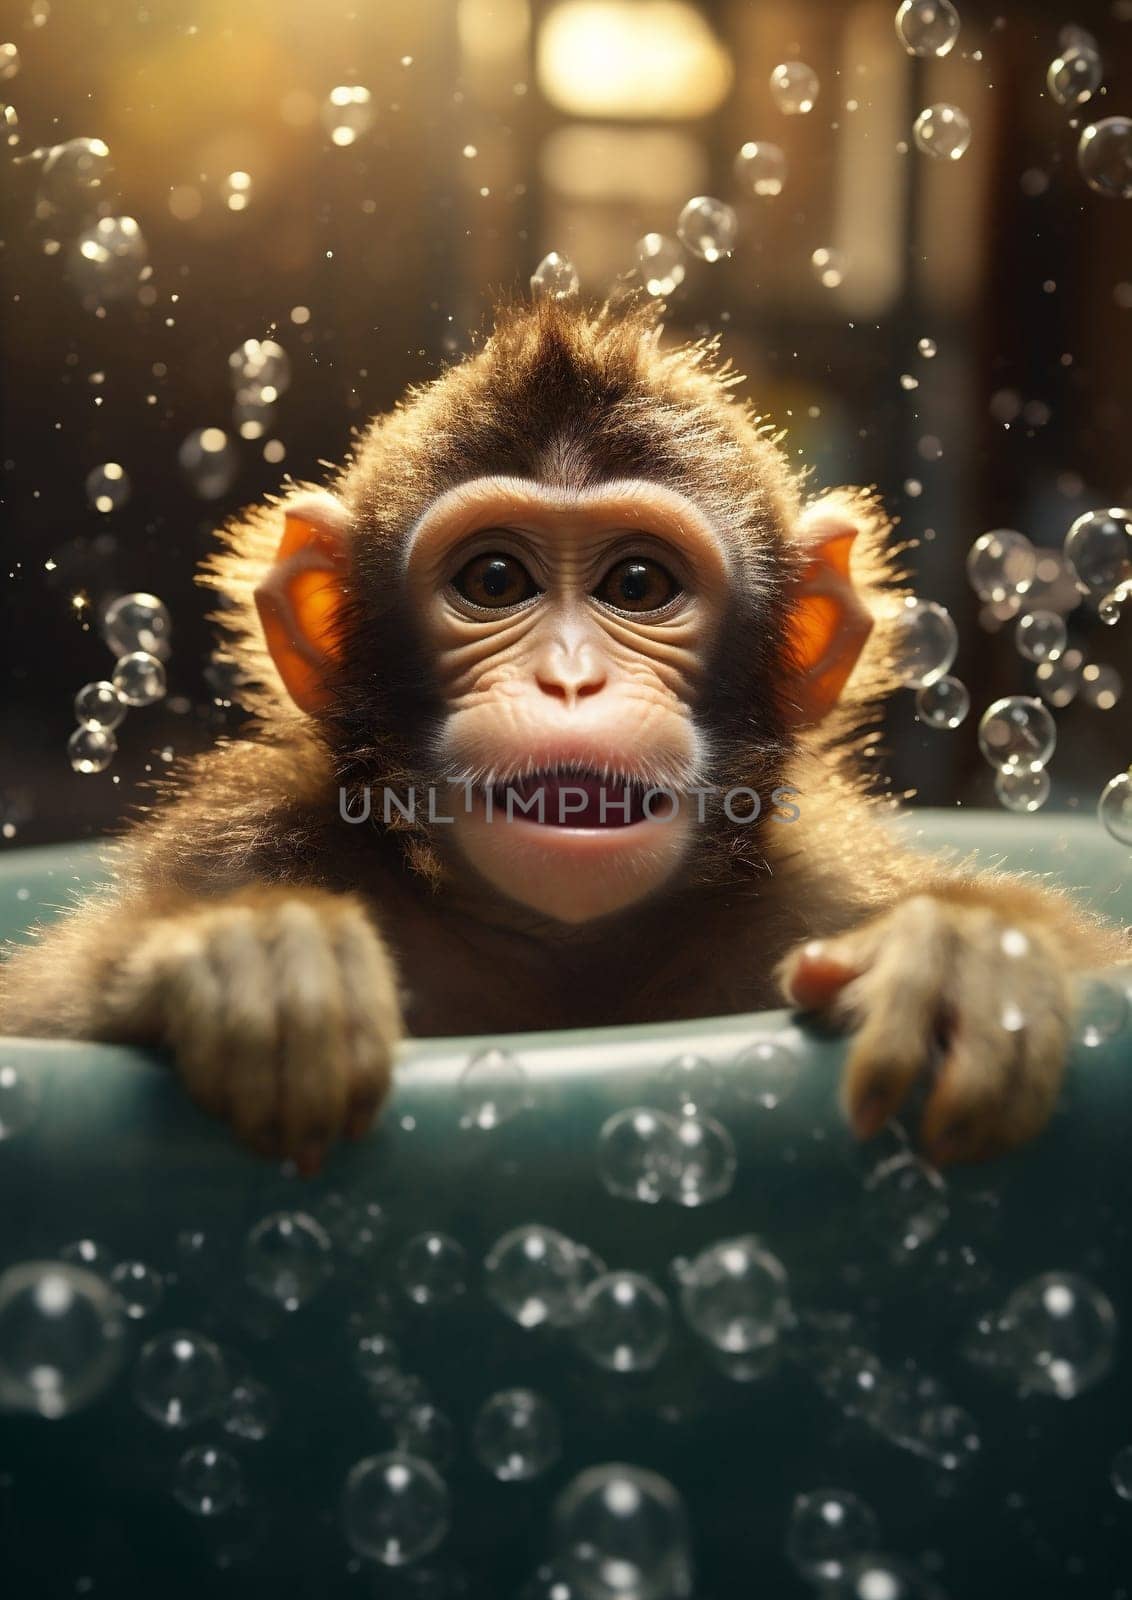 Park monkey portrait face wildlife cute wild young macaque asia primate mammal animals nature brown ape forest baby fur